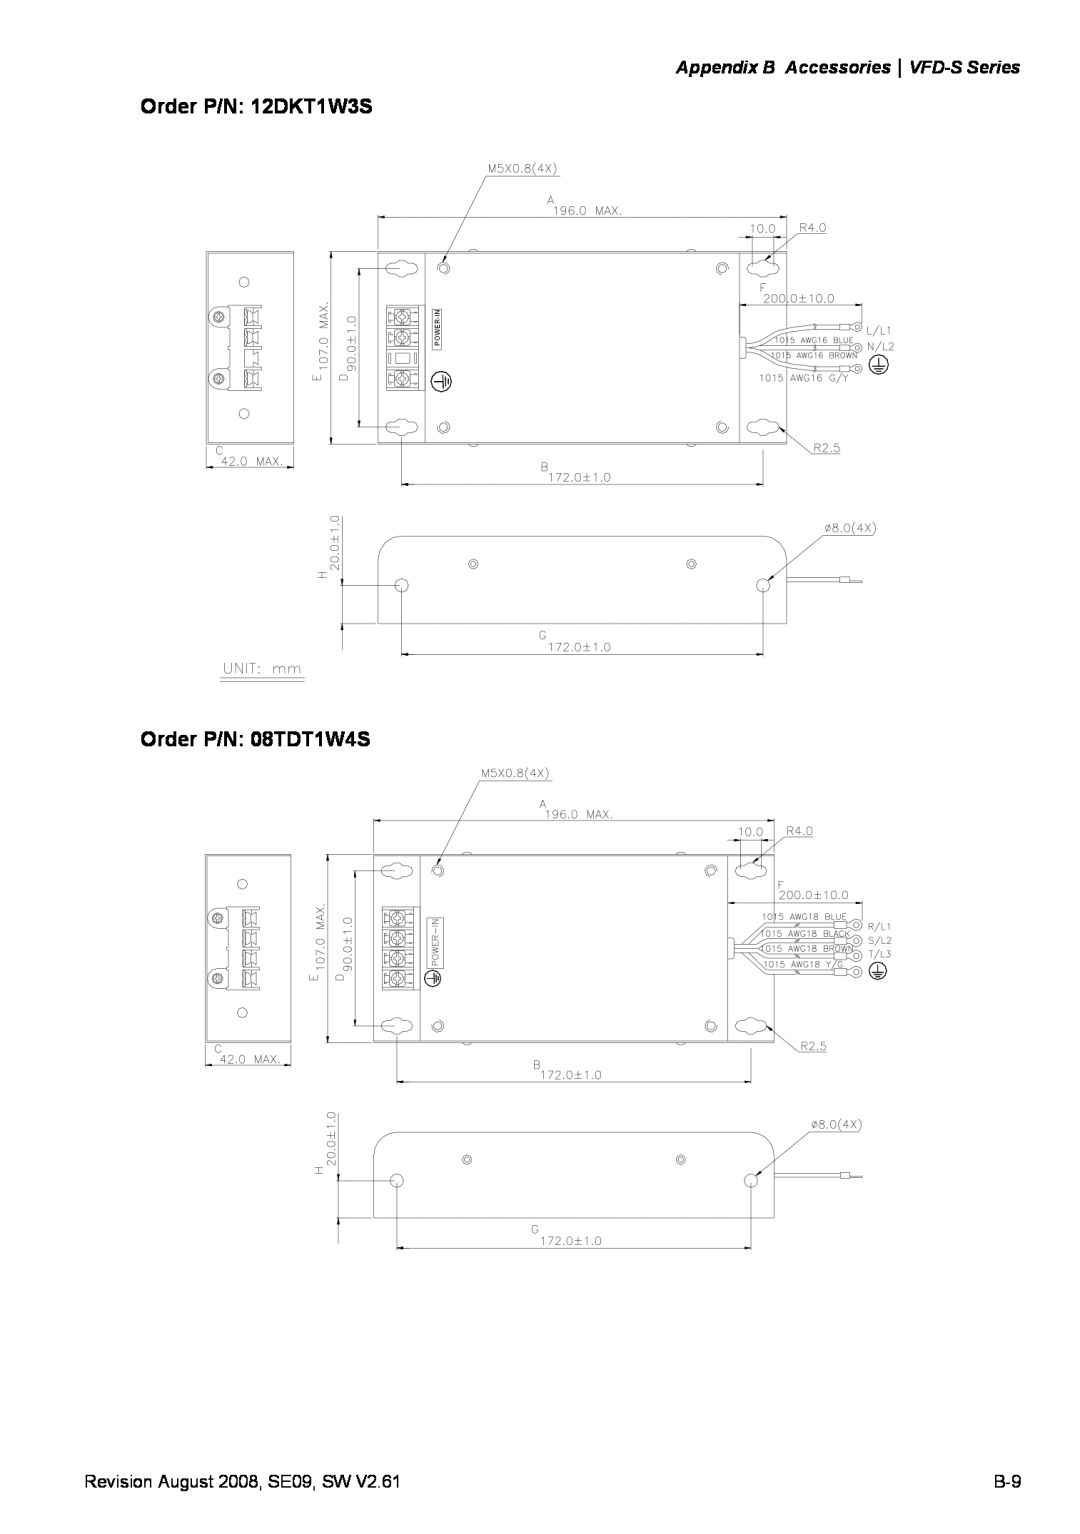 Delta Electronics manual Order P/N 12DKT1W3S, Order P/N 08TDT1W4S, Appendix B AccessoriesVFD-S Series, Power-In 